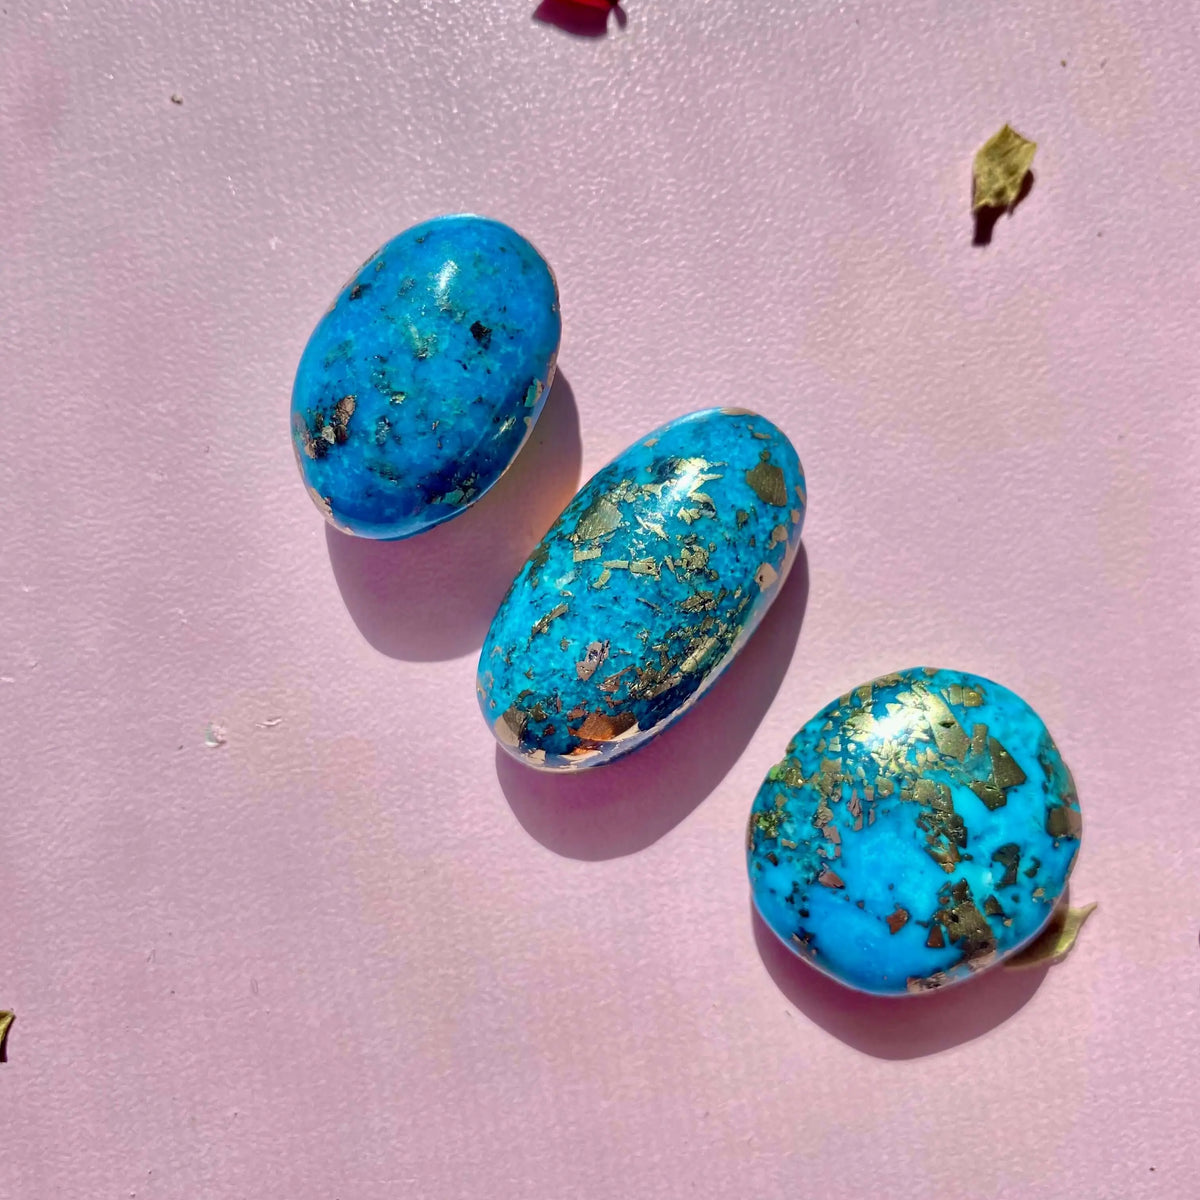 Authentic Morenci Turquoise Cabochon With Pyrite Inclusions